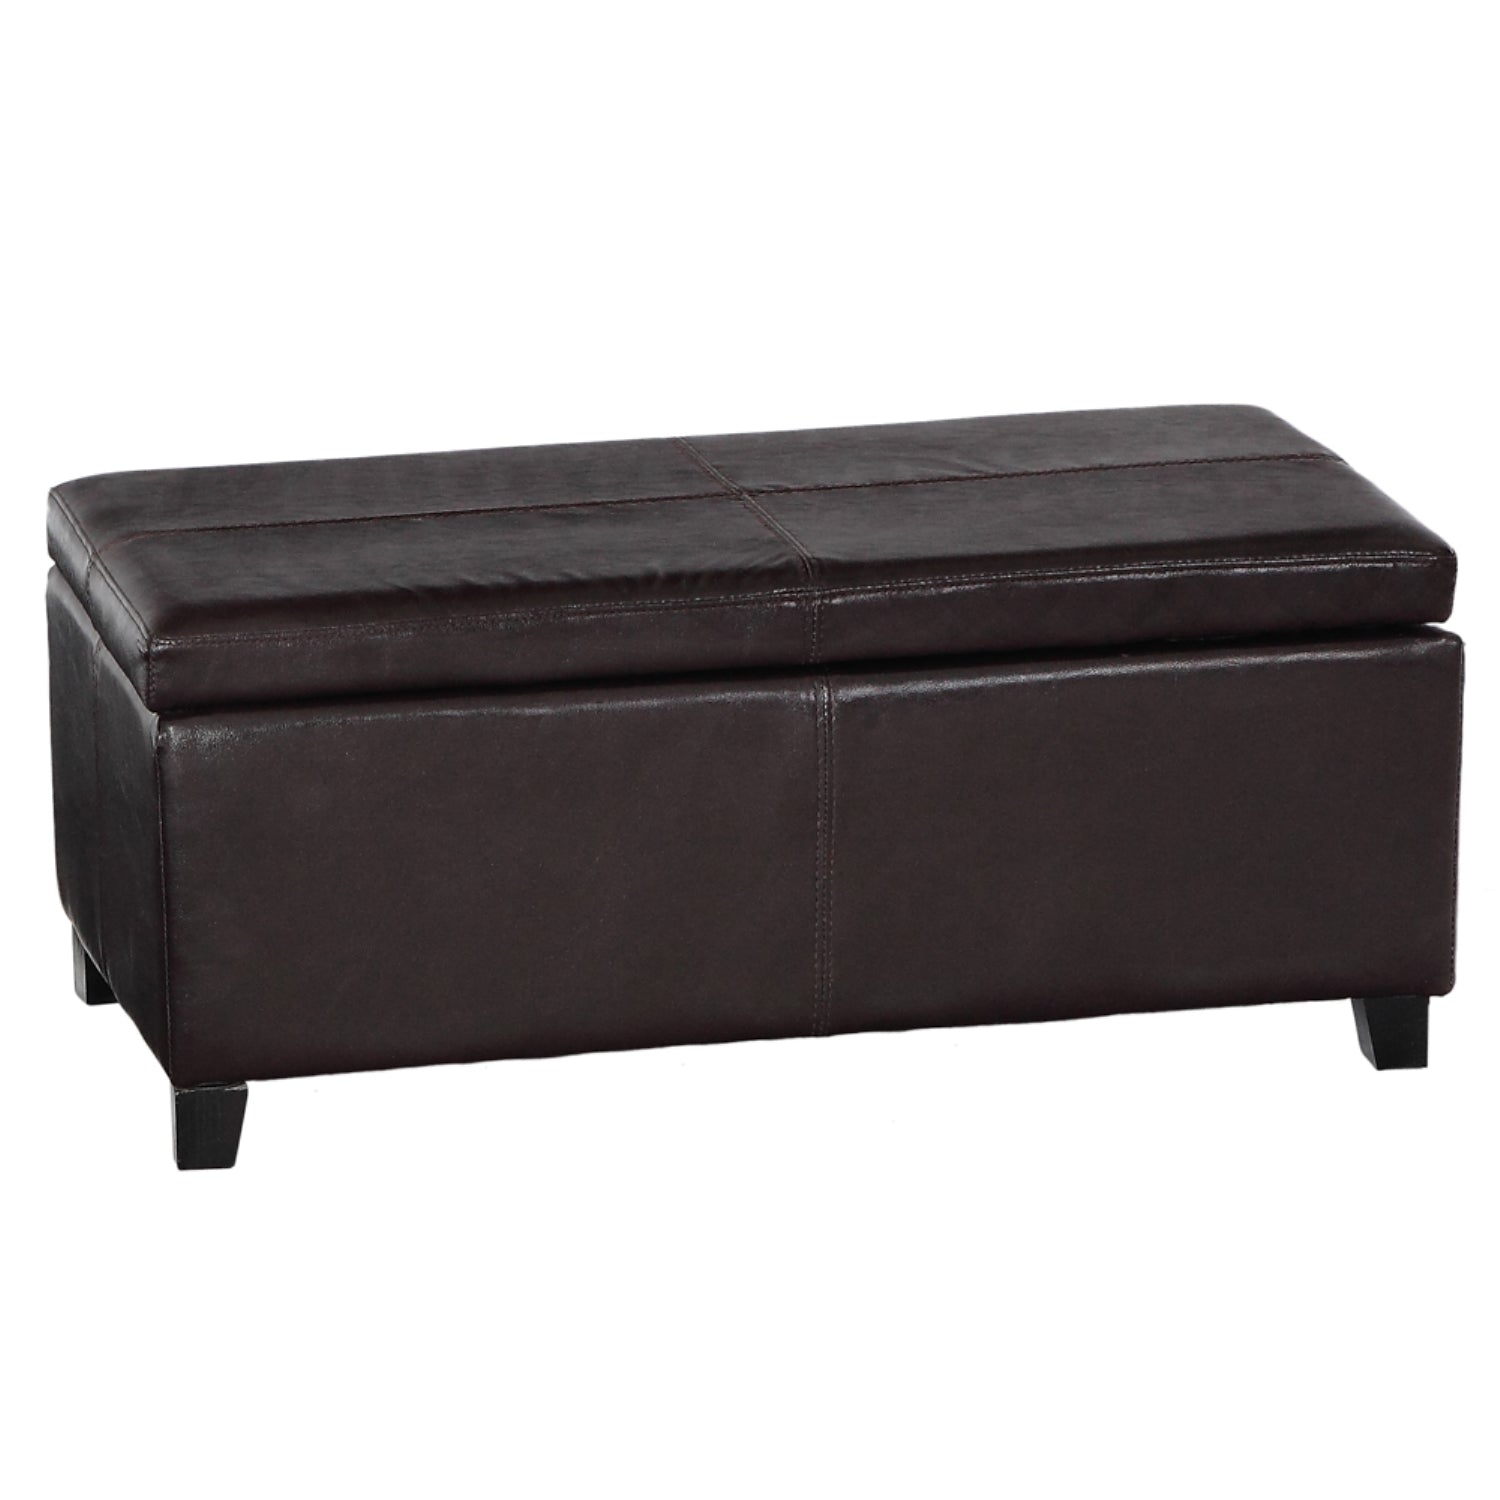 ViscoLogic Flip Lift Top Faux Leather Rectangular Ottoman (Storage and Seating) Brown